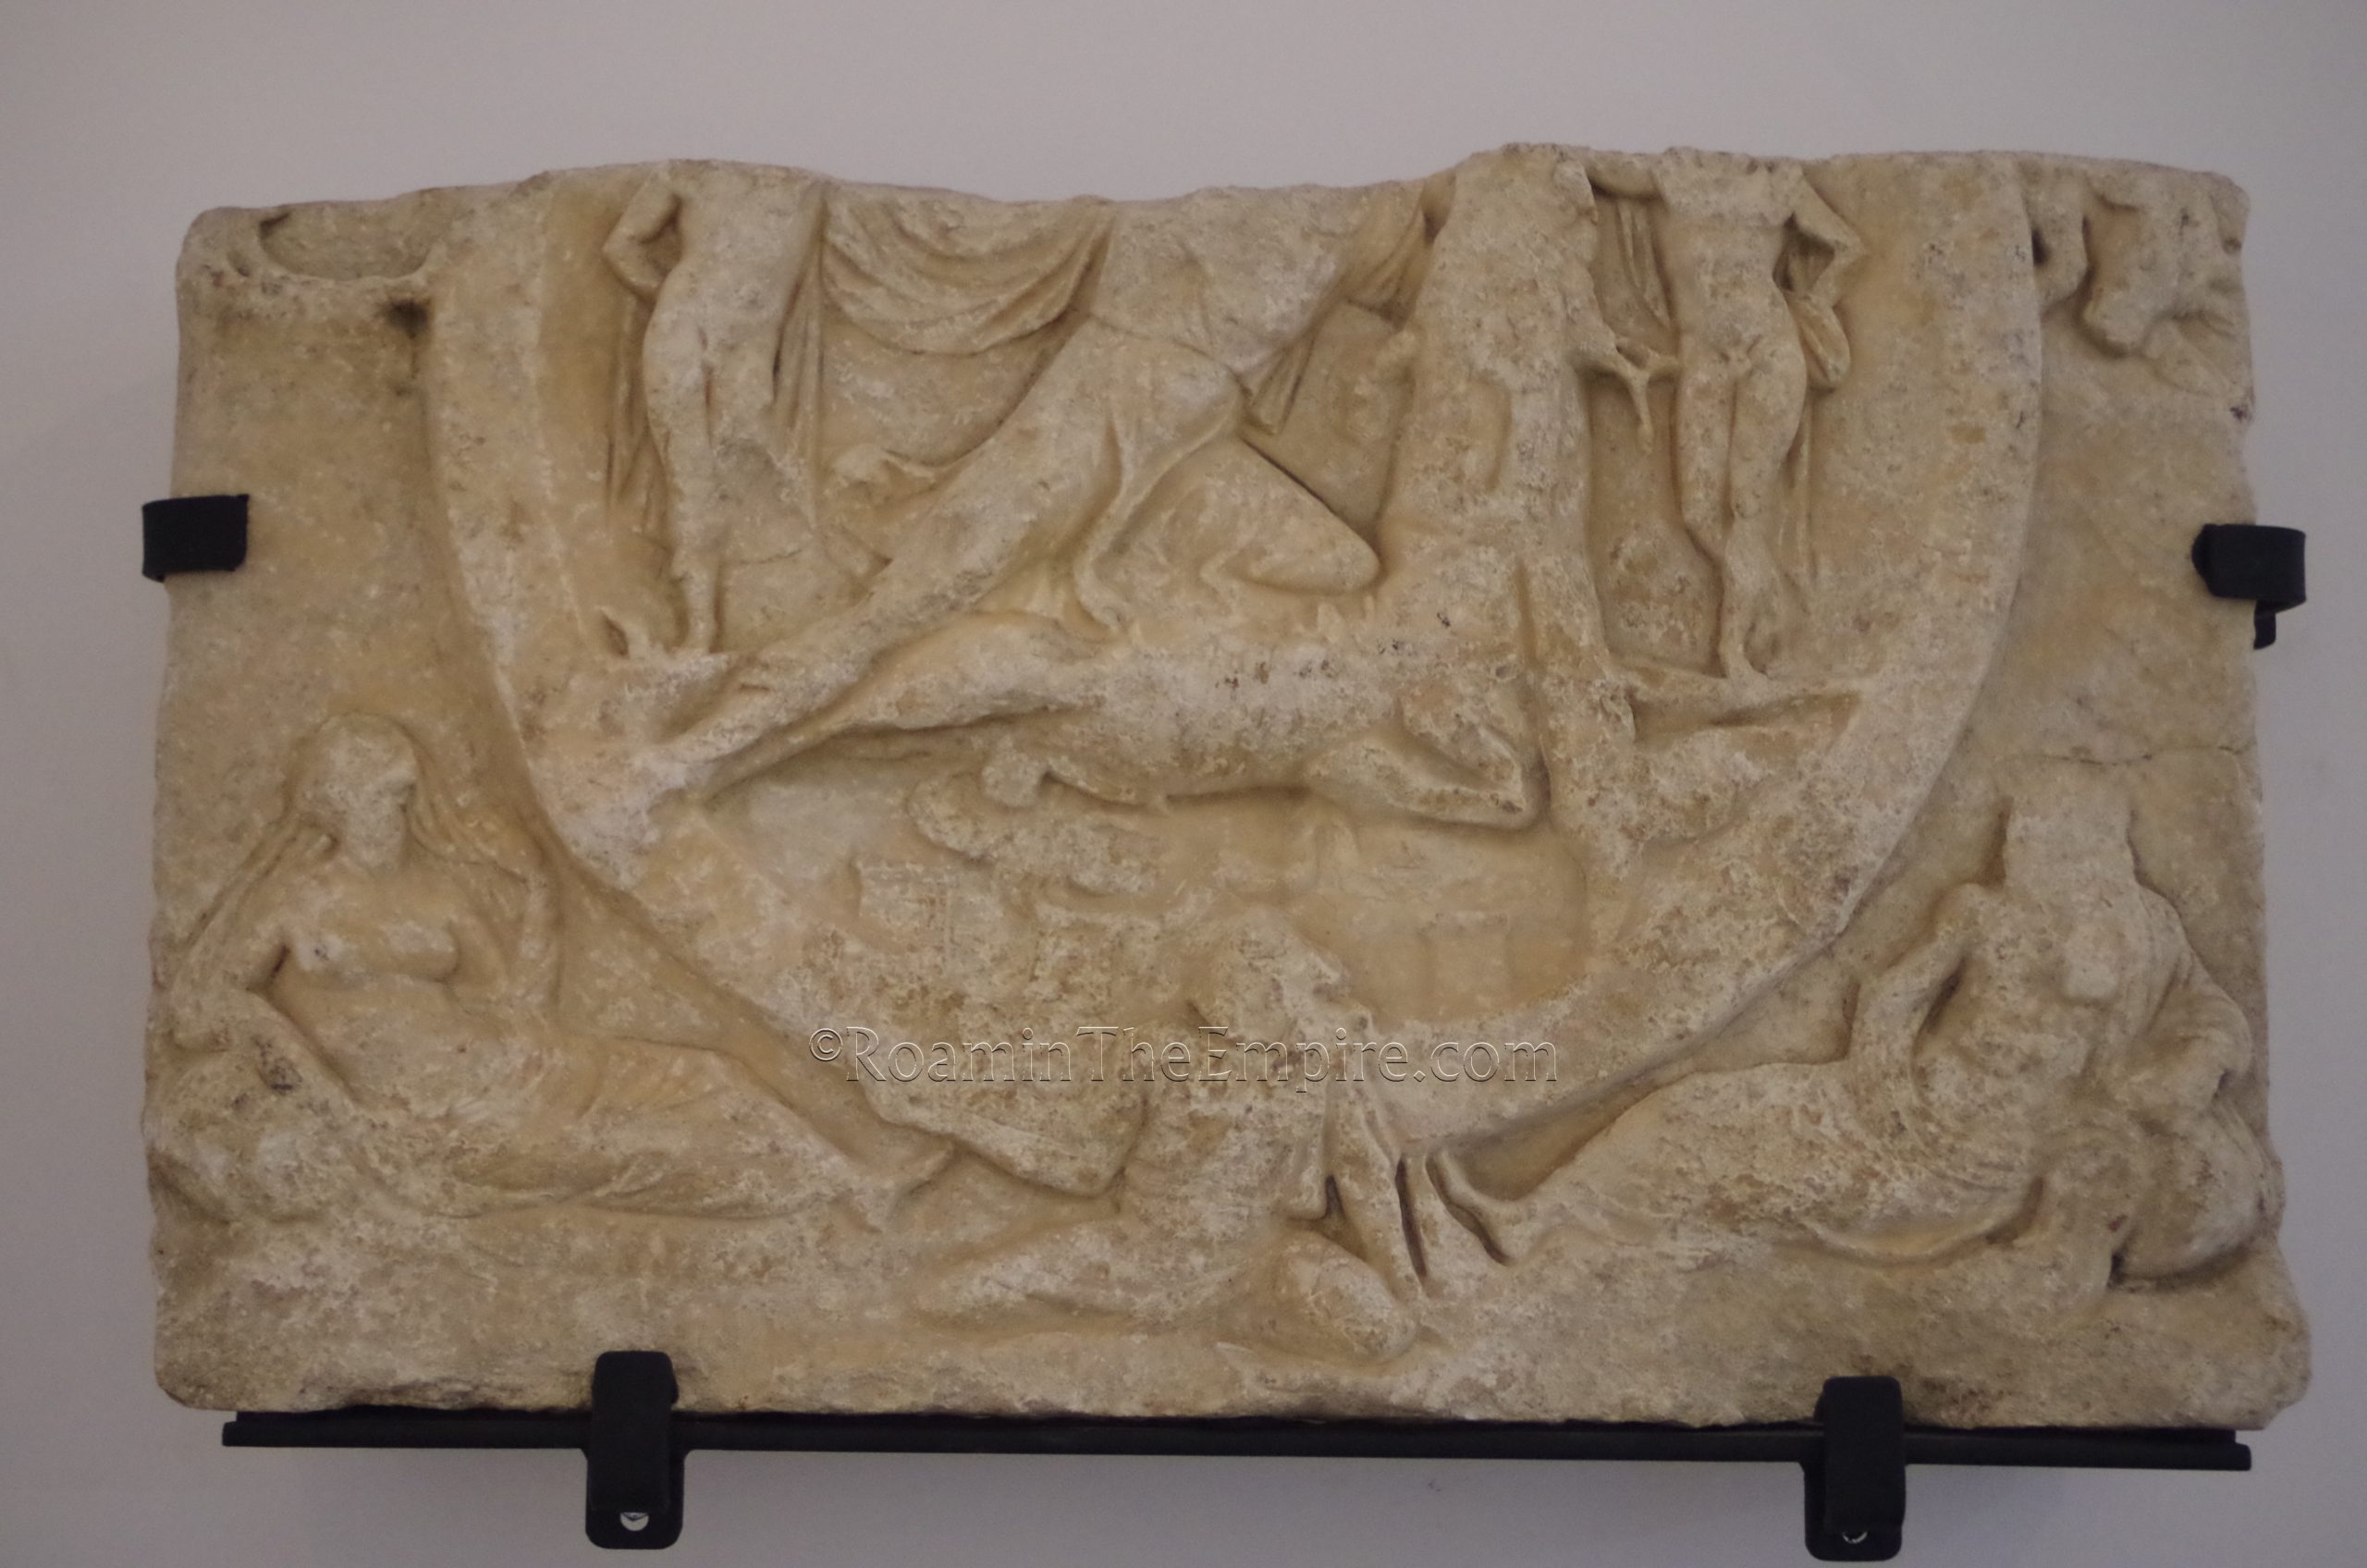 Mithraic tauroctony. Found in Sofia and dating to the 3rd century CE. Regional History Museum Sofia.